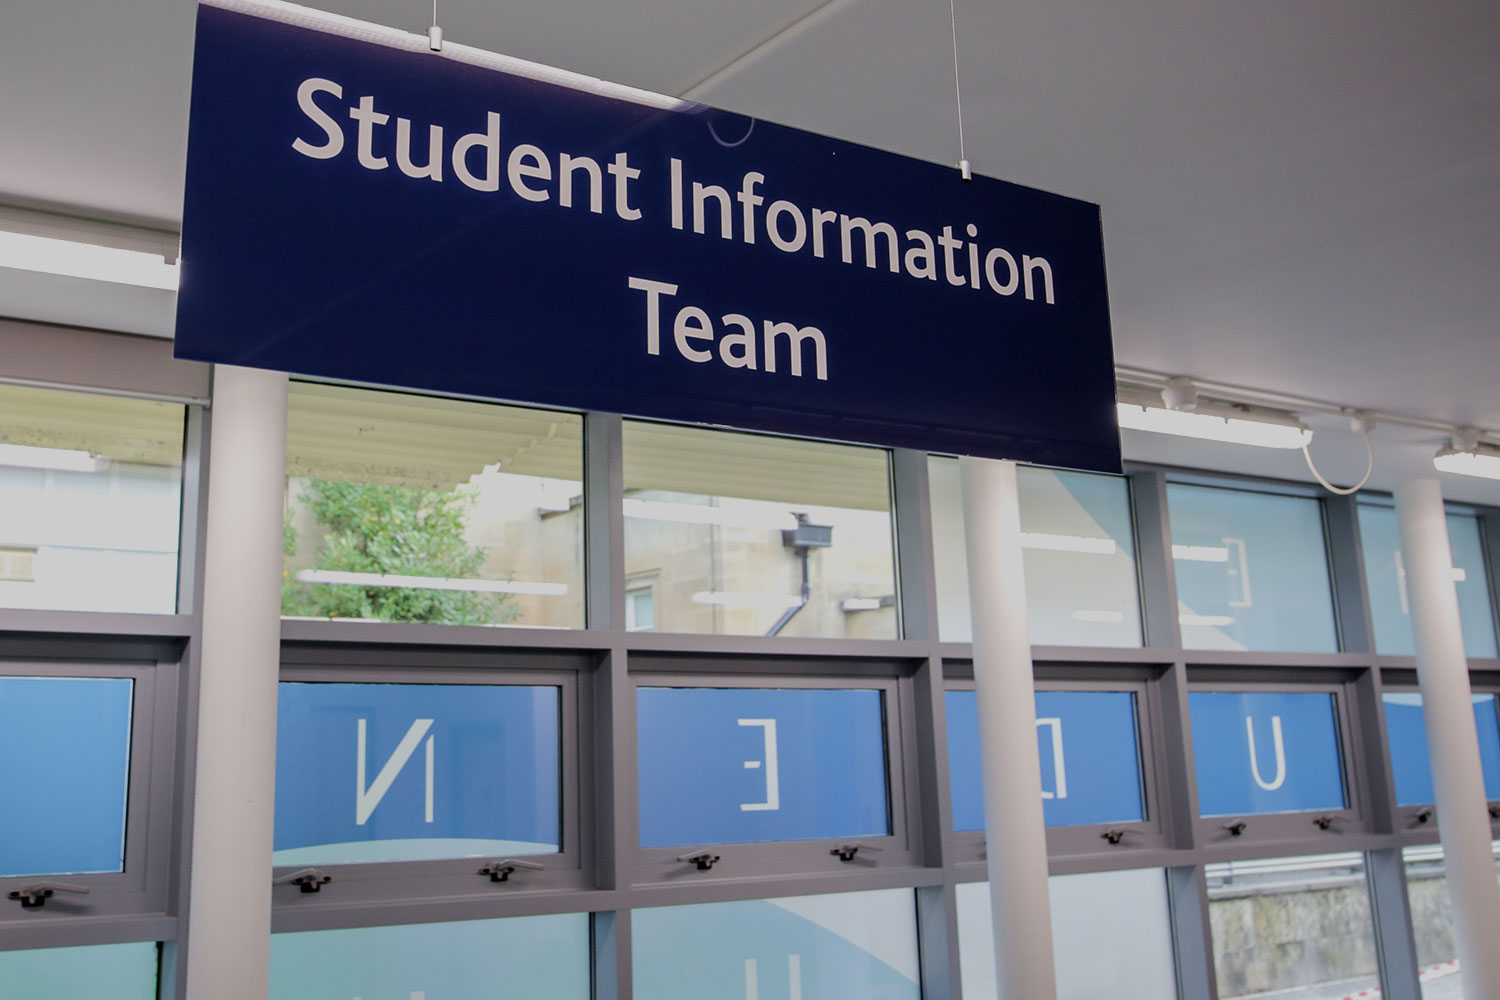 Large sign for Student Information Team hanging above a desk, with windows in the background